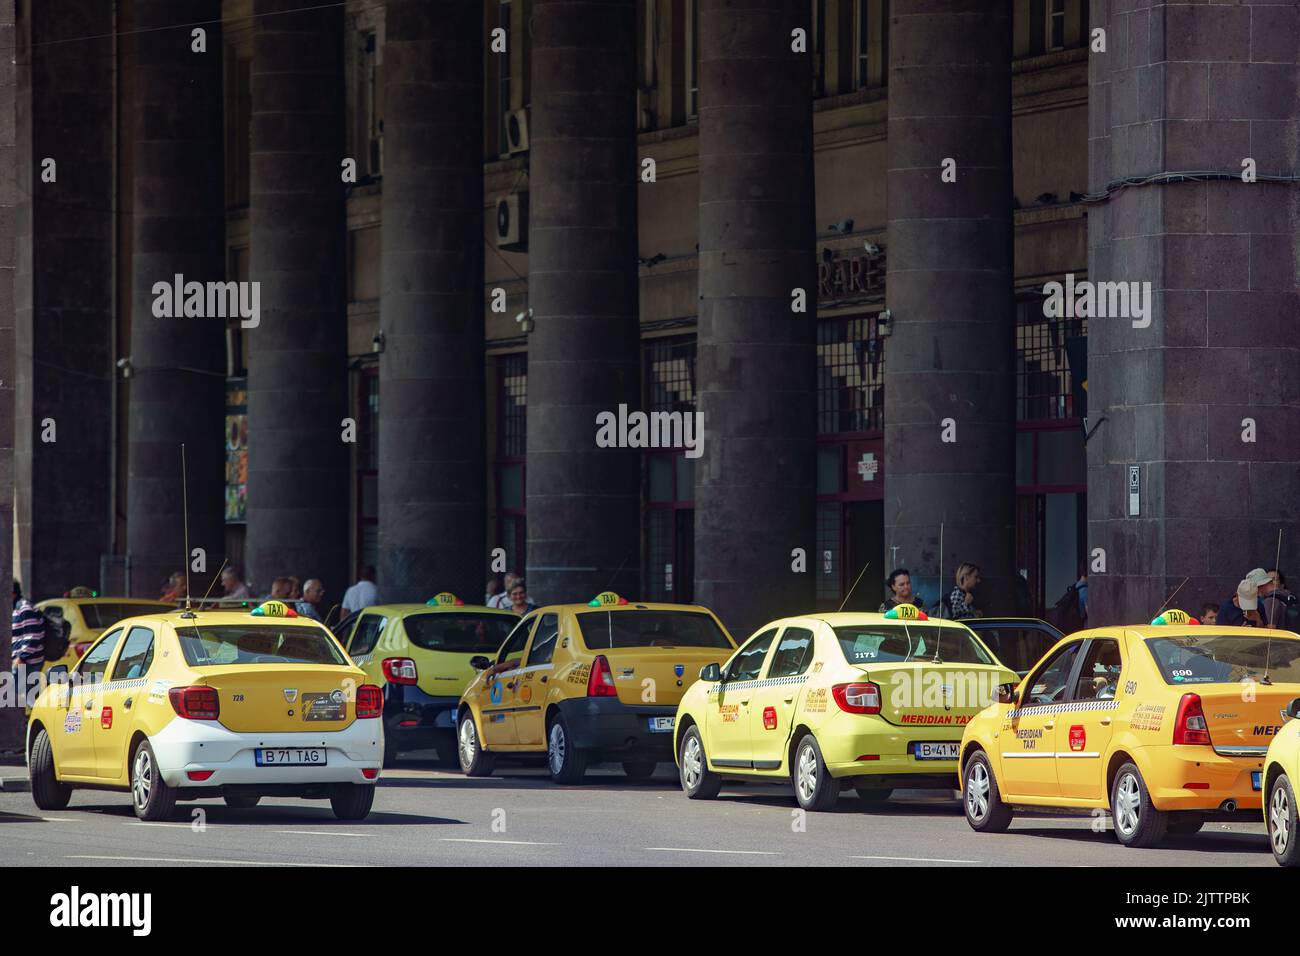 Bucharest, Romania - August 25, 2022: Yellow taxi cabs waiting in line for customers in front of the Northern Train Station in Bucharest This image is Stock Photo